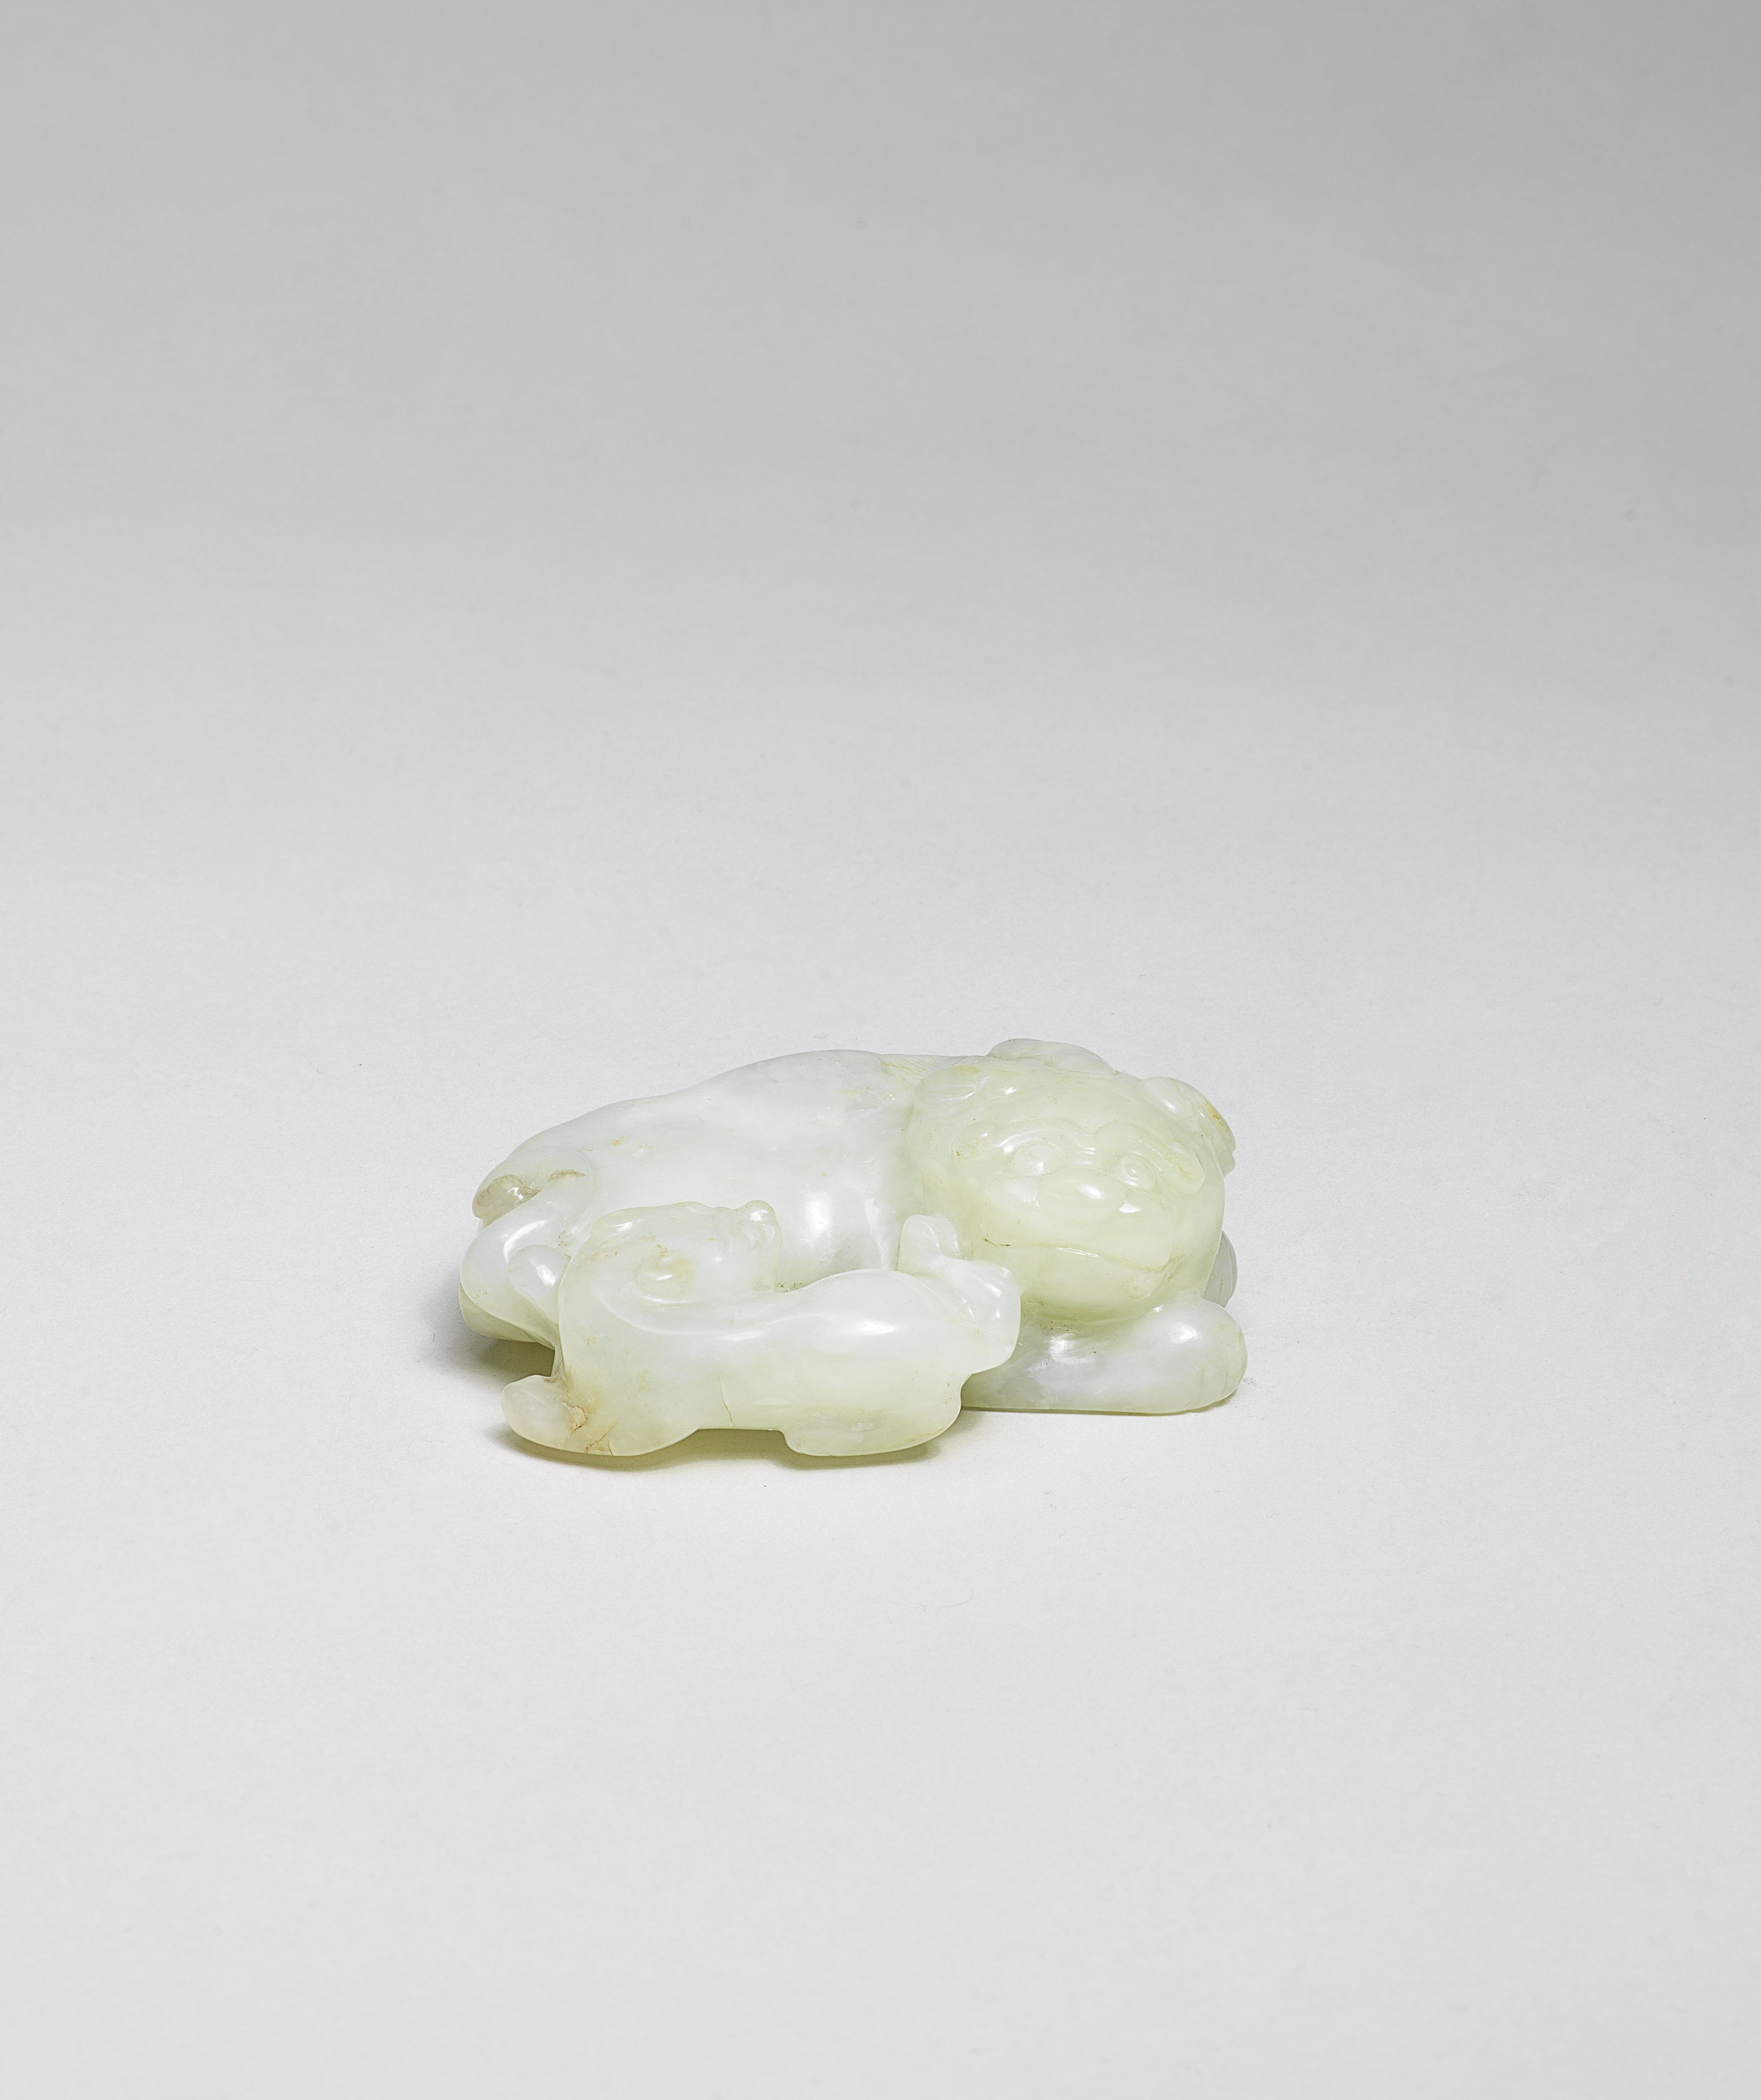 A PALE GREEN JADE CARVING OF A MYTHICAL BEAST AND CUB 17th/18th century